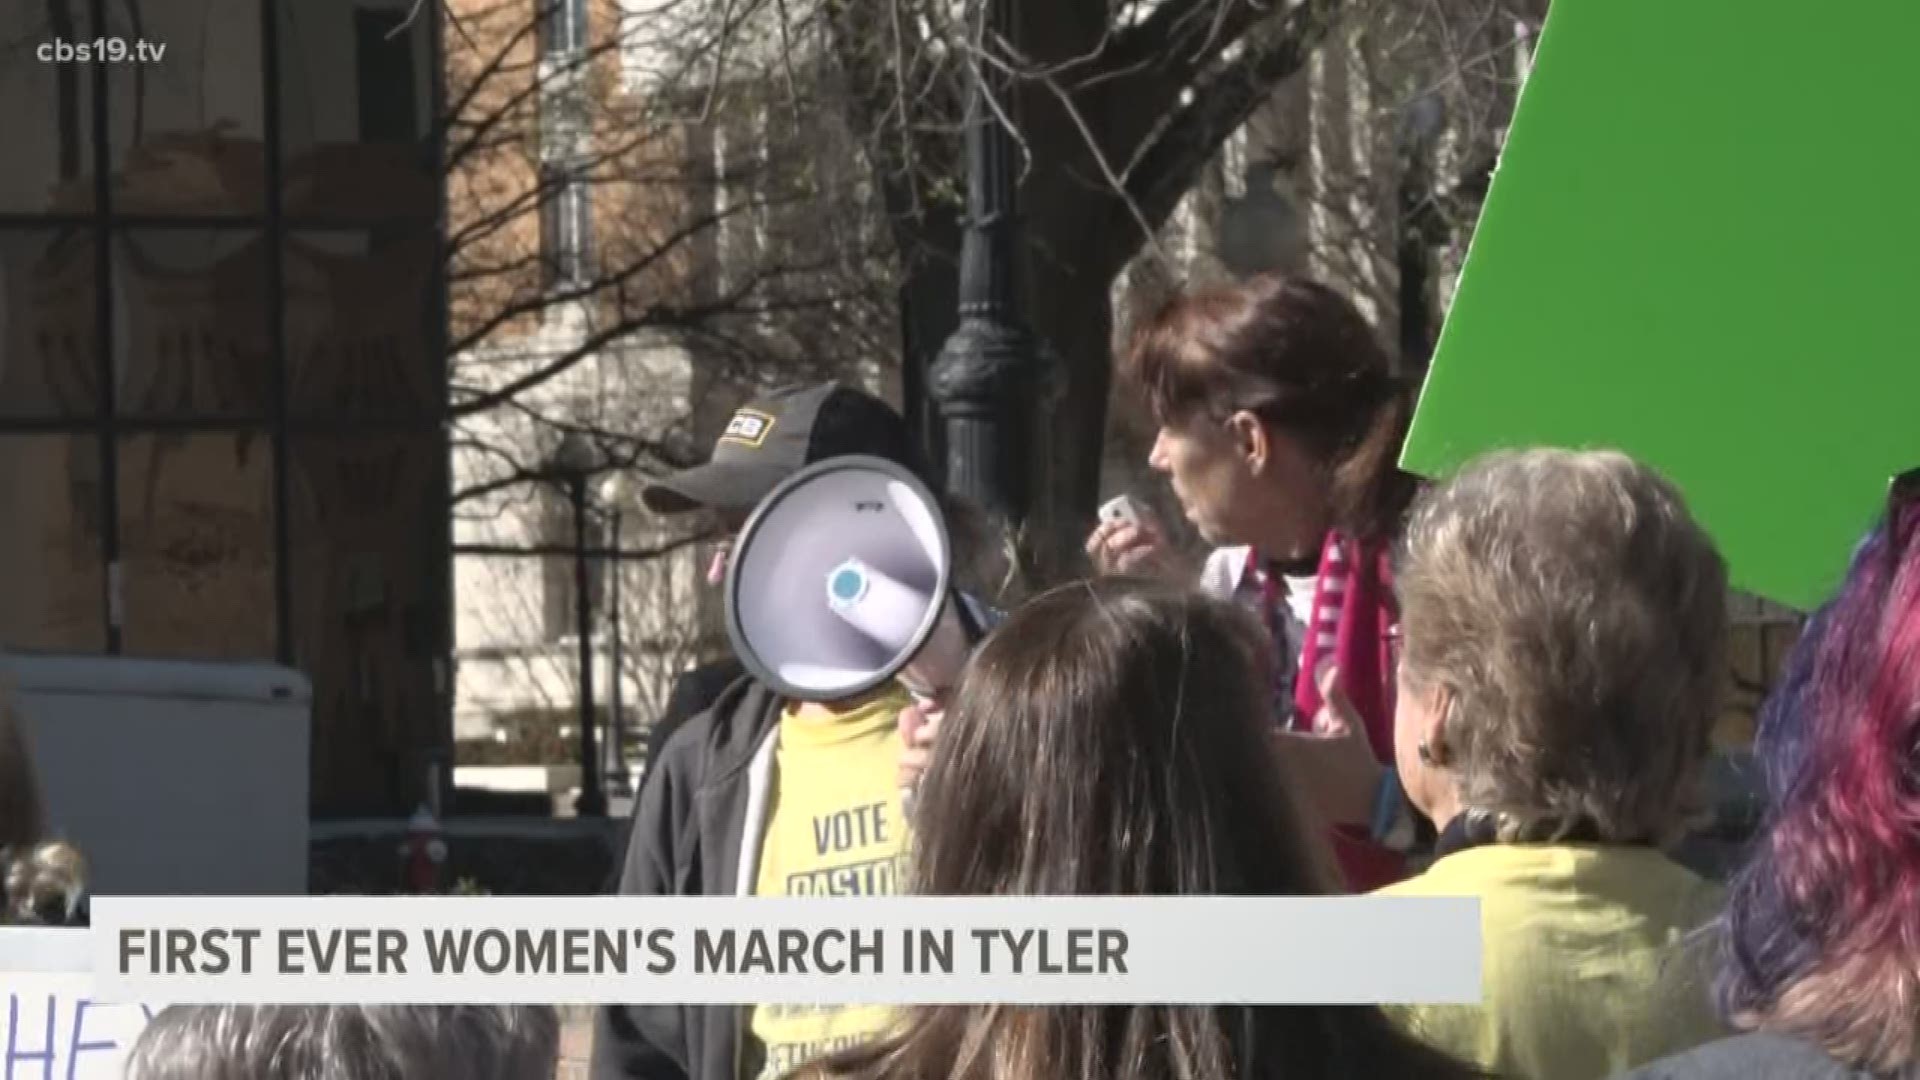 Women's marches have been held across the country since 2017, and for the first time, a Women's March was held in Tyler.